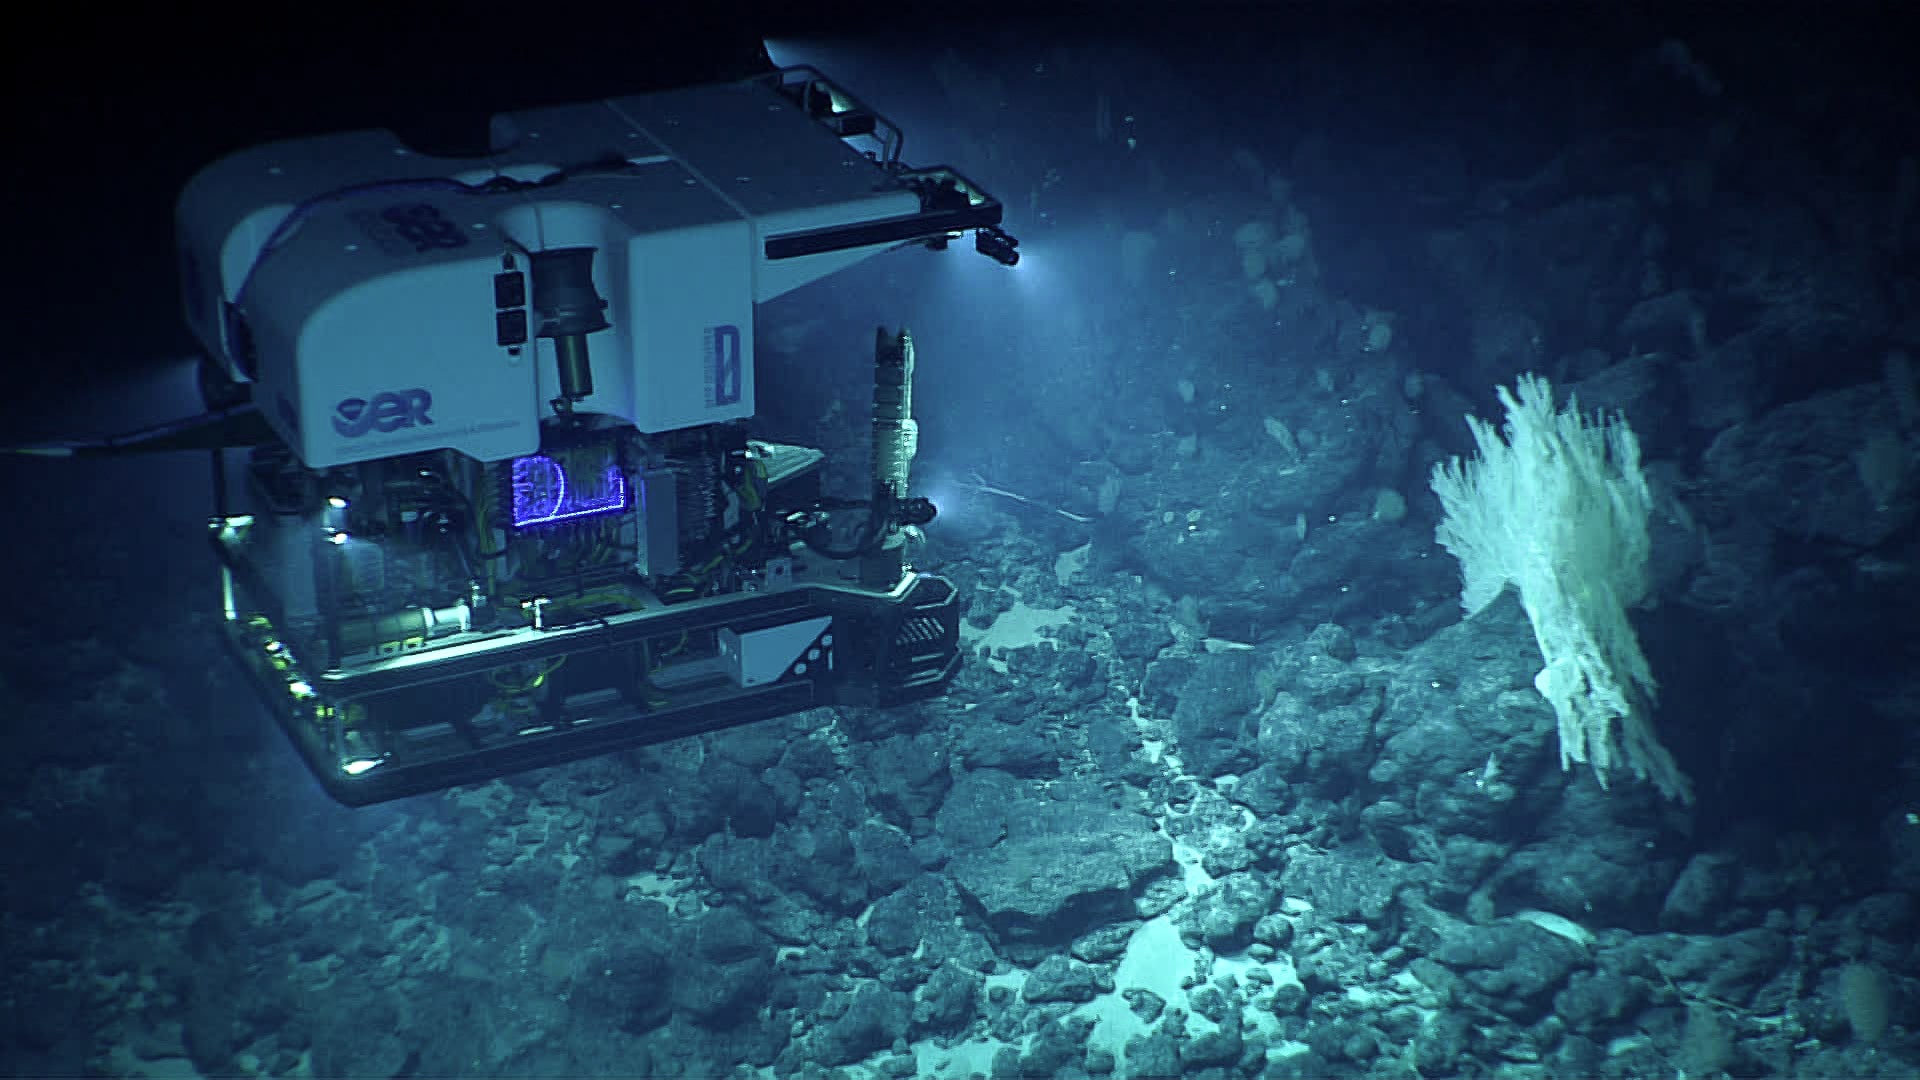 ROV Deep Discoverer documents the benthic communities at Paganini Seamount during the Deep-Sea Symphony: Exploring the Musicians Seamounts expedition.